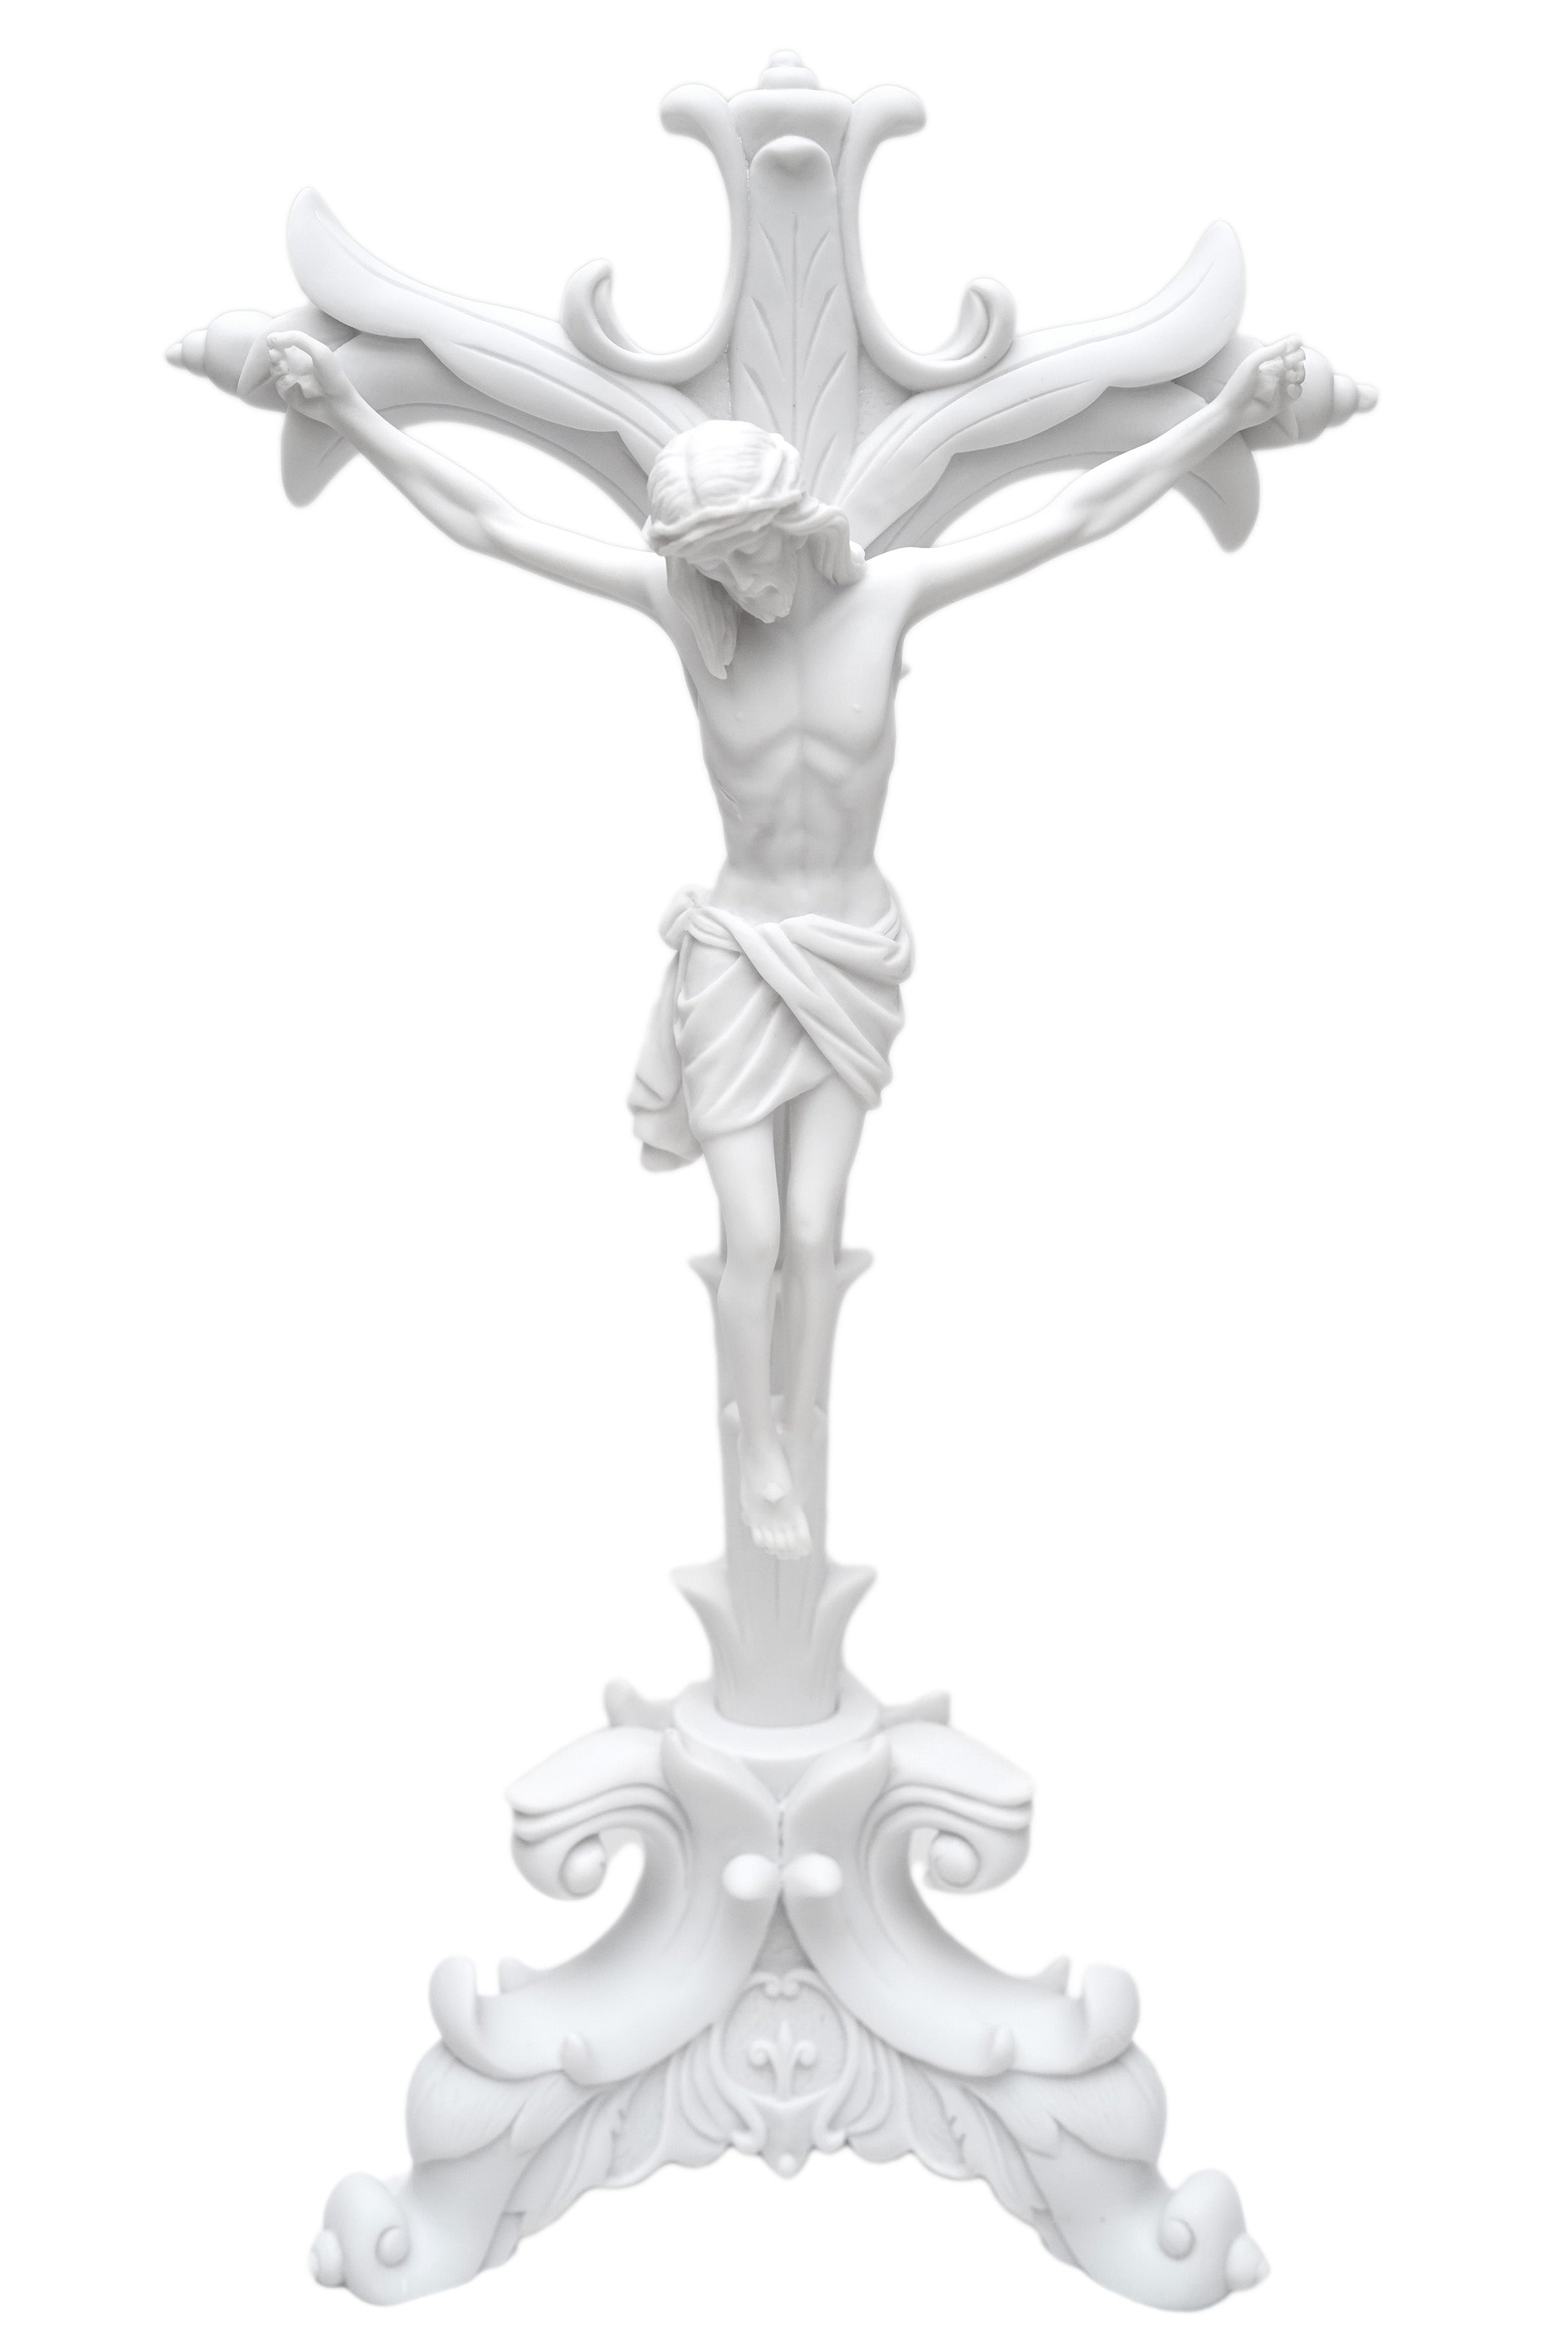 21.5" Crucifixion Crucifix of Jesus on the Cross with Base Statue Catholic Religiuos Vittoria Collection Made in Italy Home Decoration